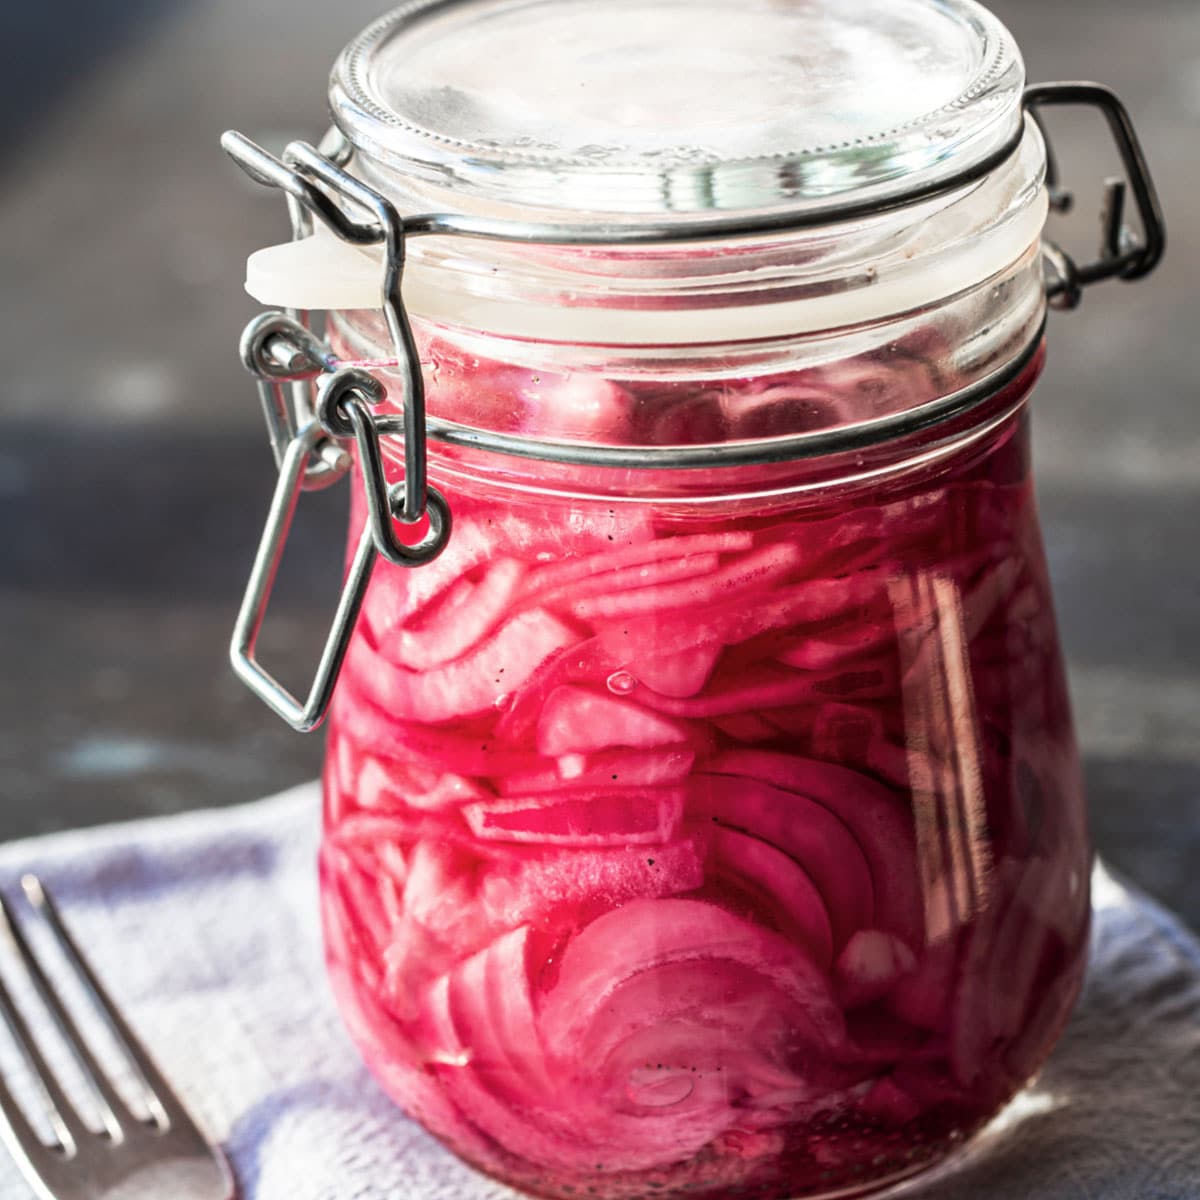 Do pickled onions go bad? This is a question that has undoubtedly crossed the mind of many an onion lover. The answer, interestingly enough, is both yes and no. Let's explore this a little further.